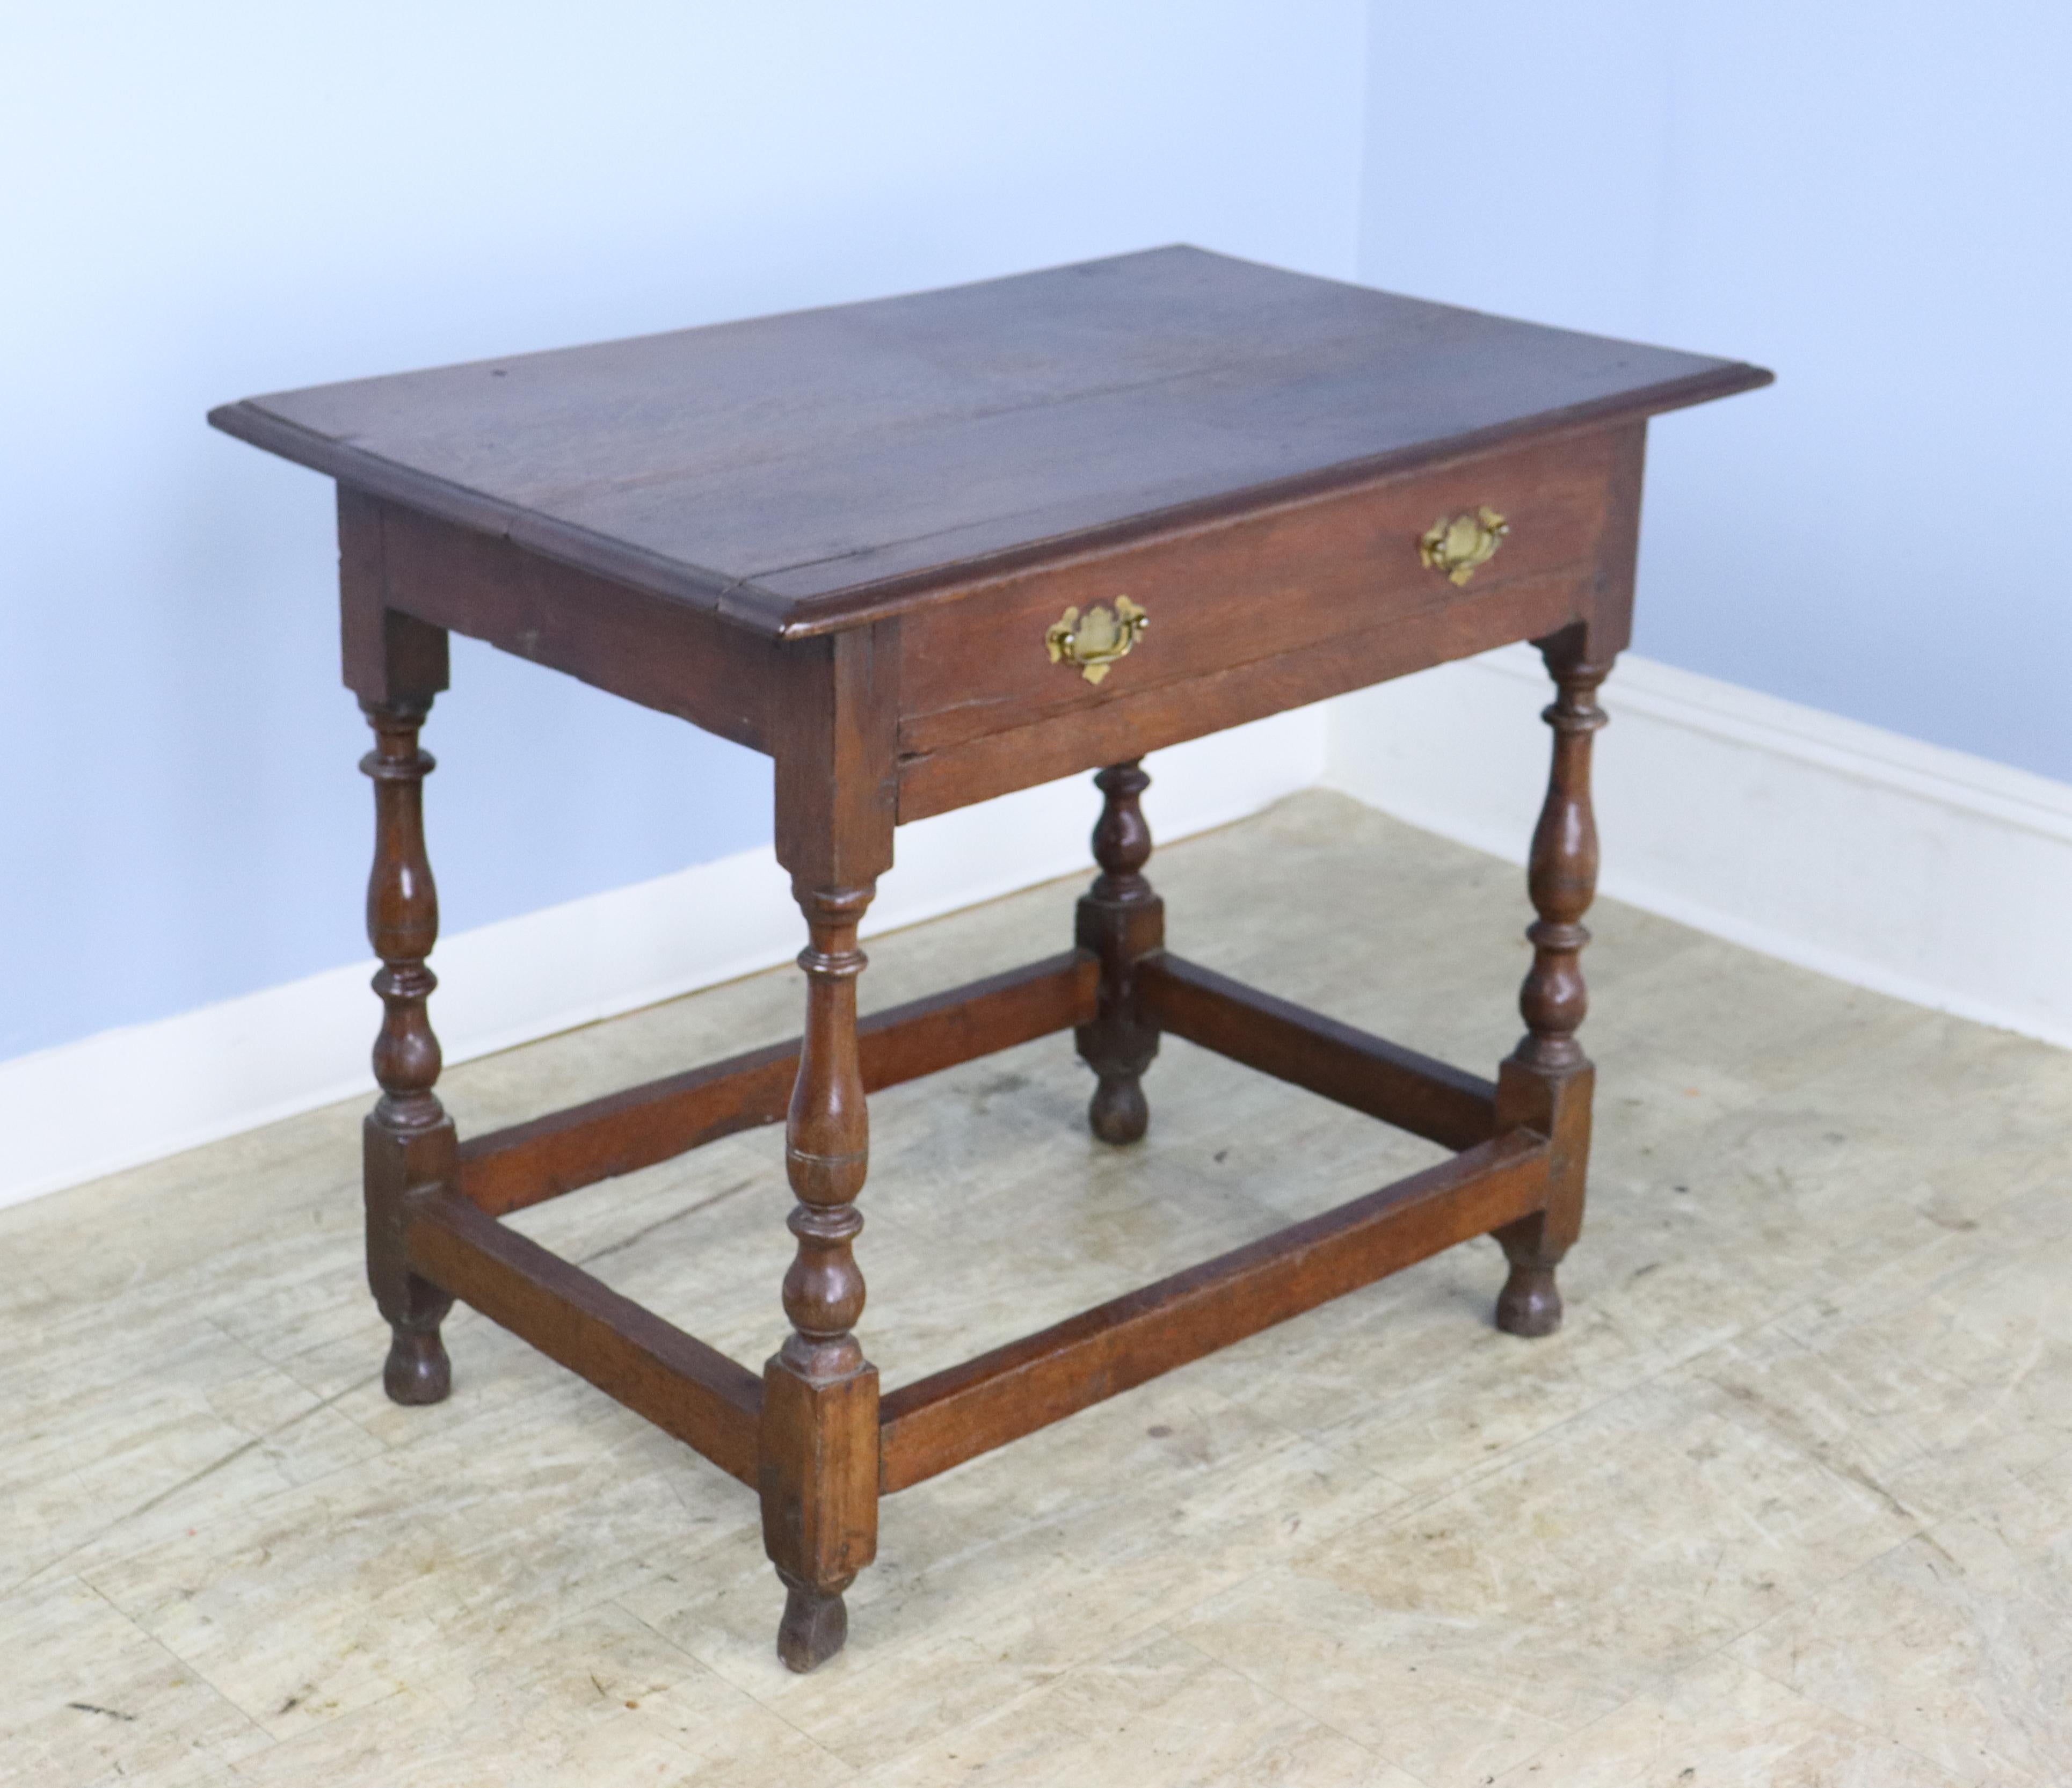 An early elegant oak side table with a pretty top with some age appropriate distress, nicely turned legs, and good brass handles.